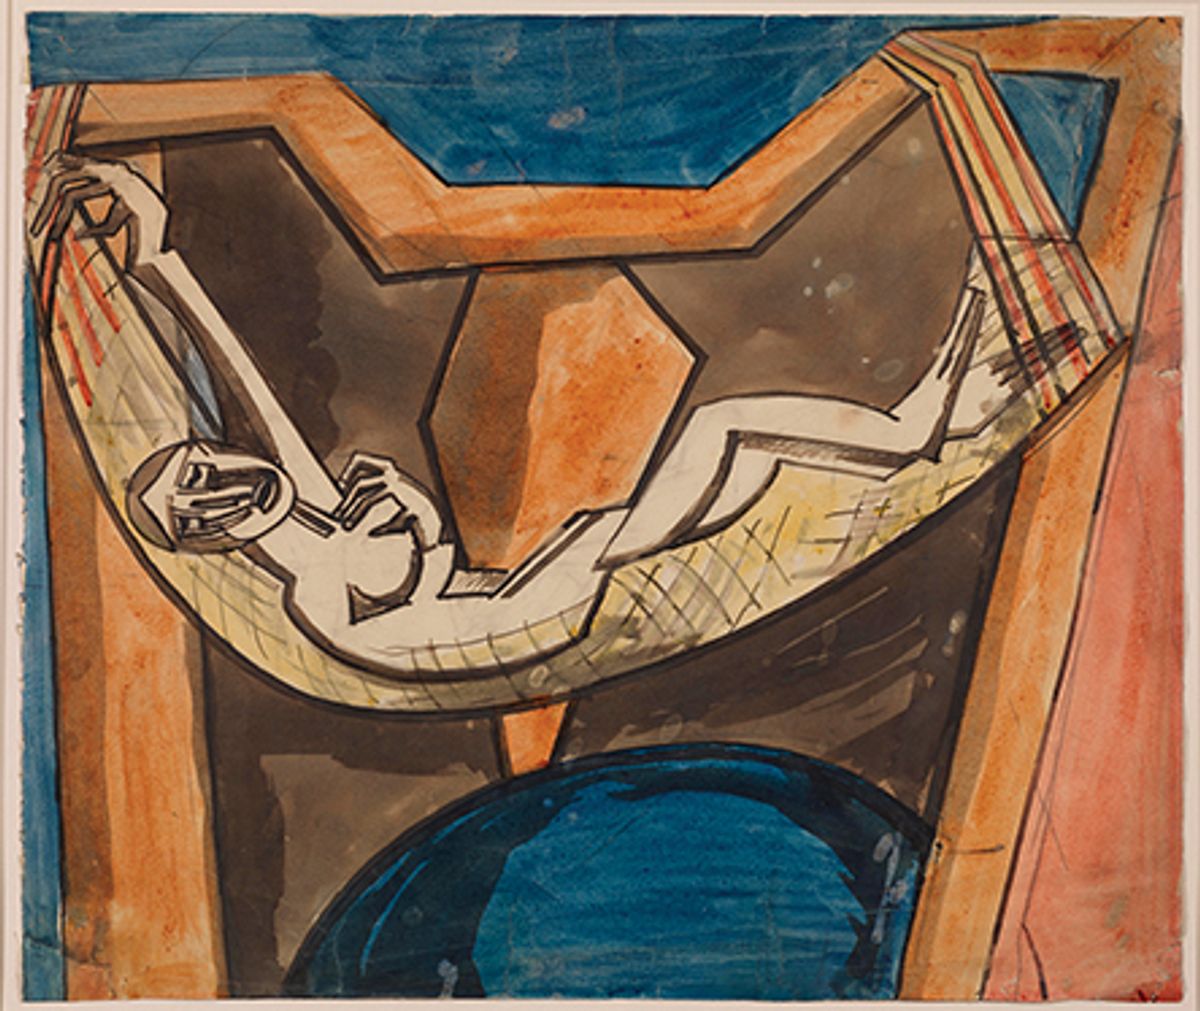 Helen Saunders’s Hammock (around 1913-14); after the disappearance of Vorticism, the artist eschewed other artistic movements The Courtauld, London (Samuel Courtauld Trust); © Estate of Helen Saunders

